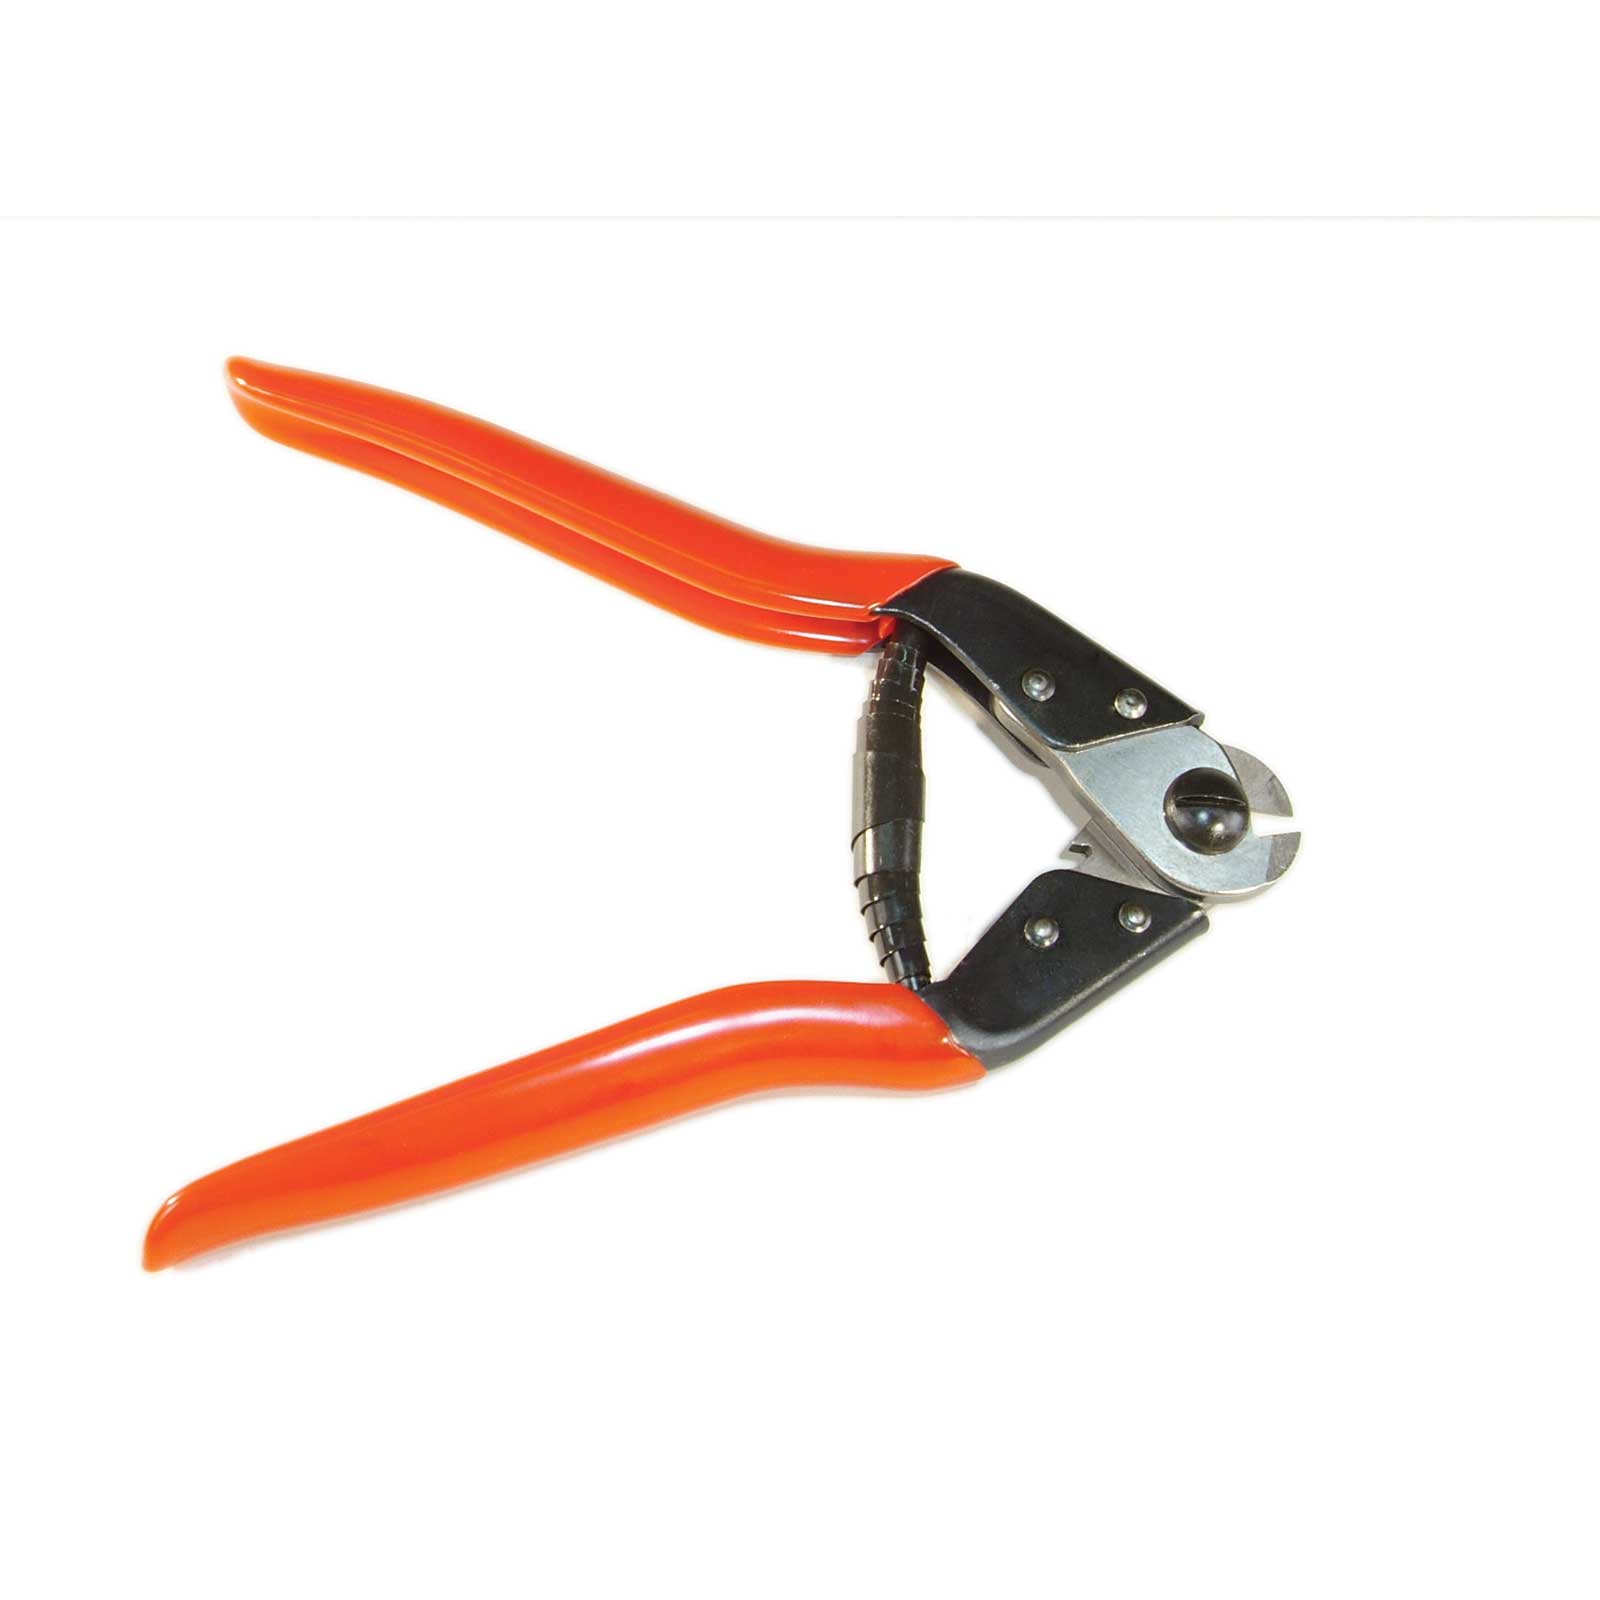 Hard Wire and Rope Cutter